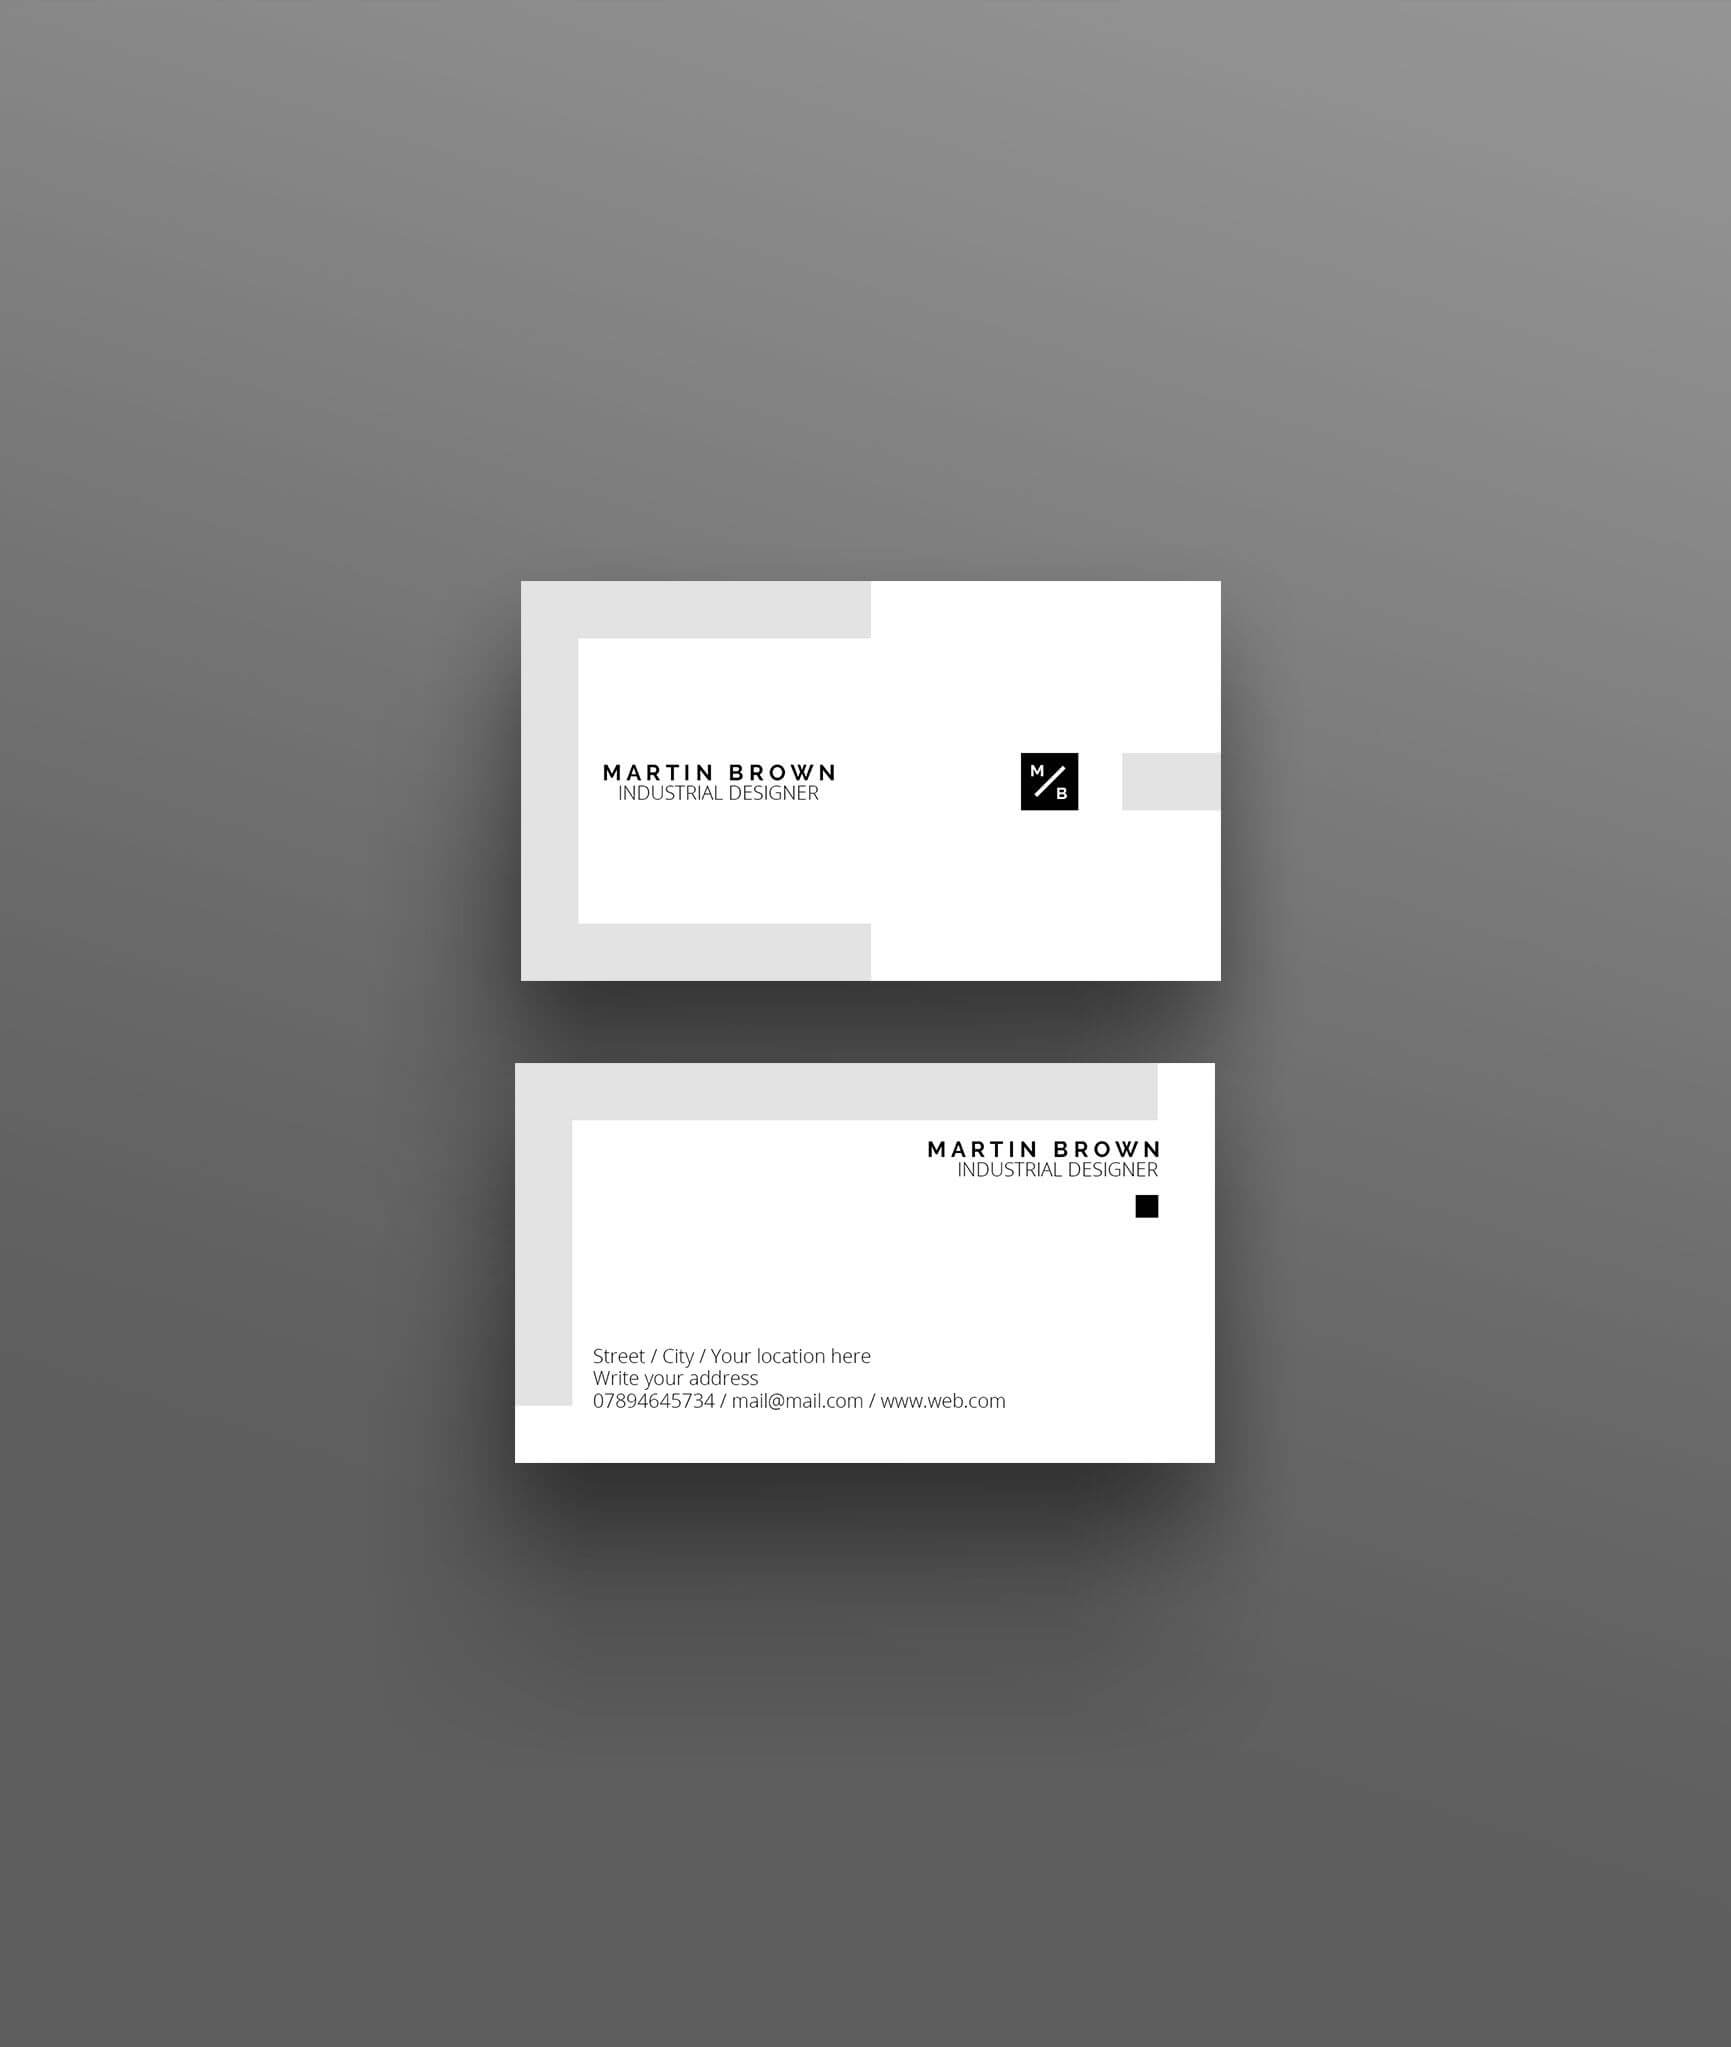 Business Card Template For Adobe Photoshop / Psd File With Regard To Name Card Template Photoshop